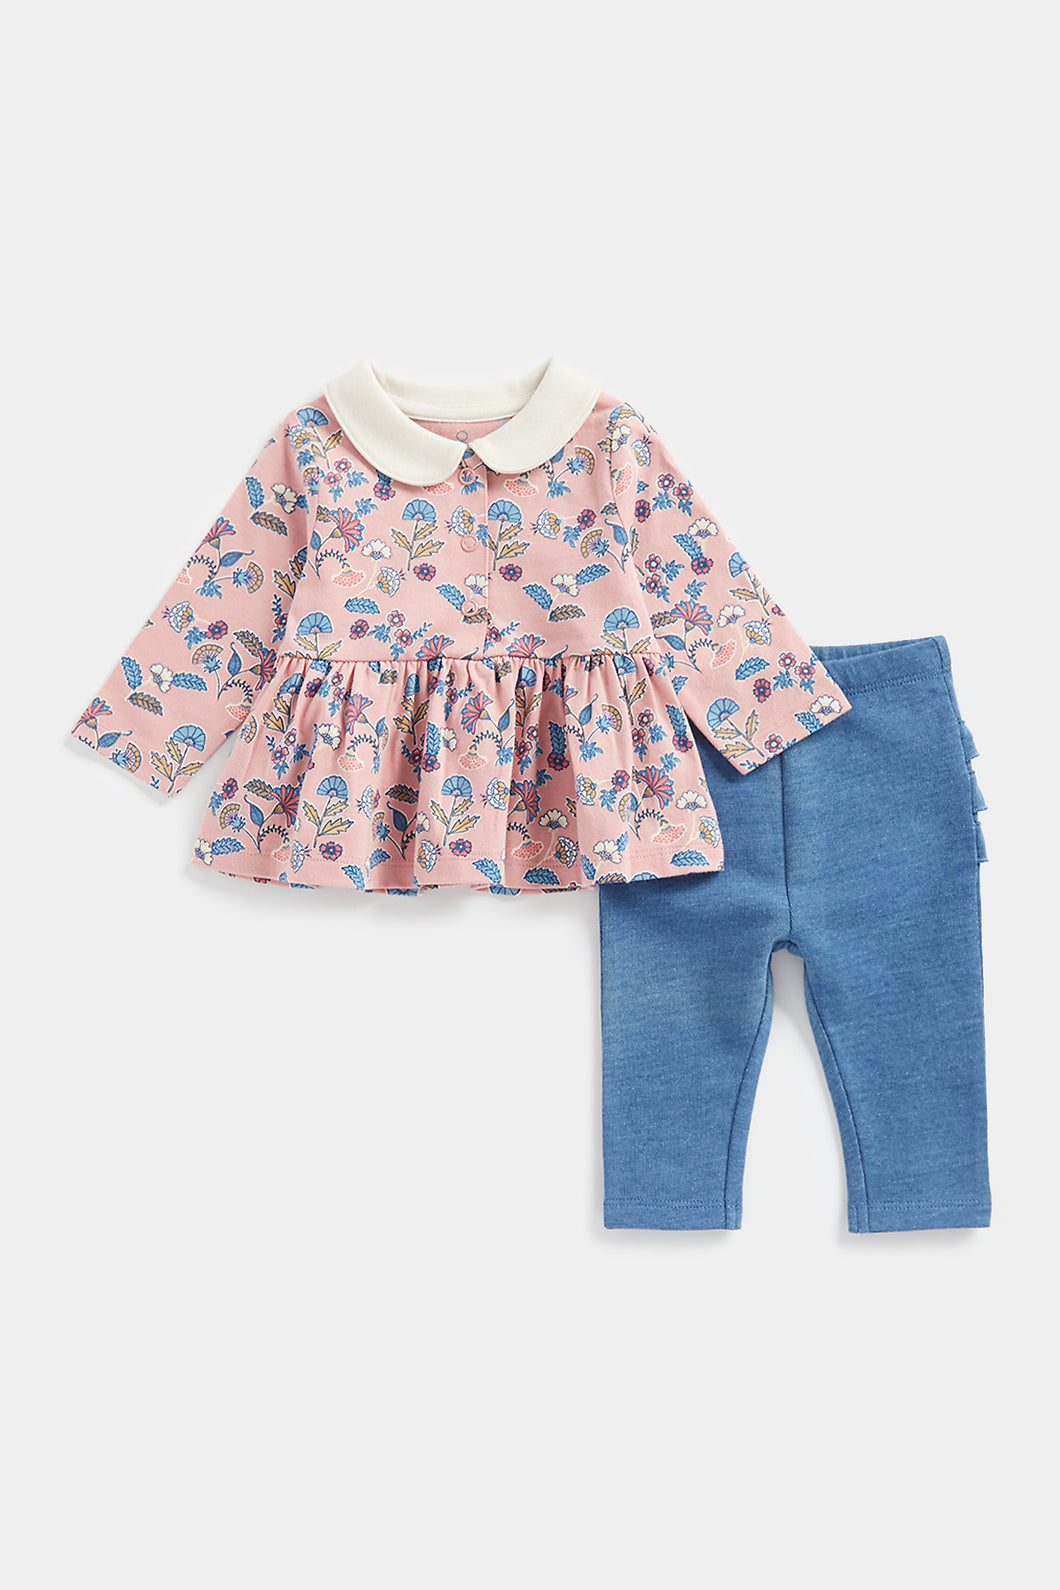 Mothercare Pink Floral Top and Leggings Set